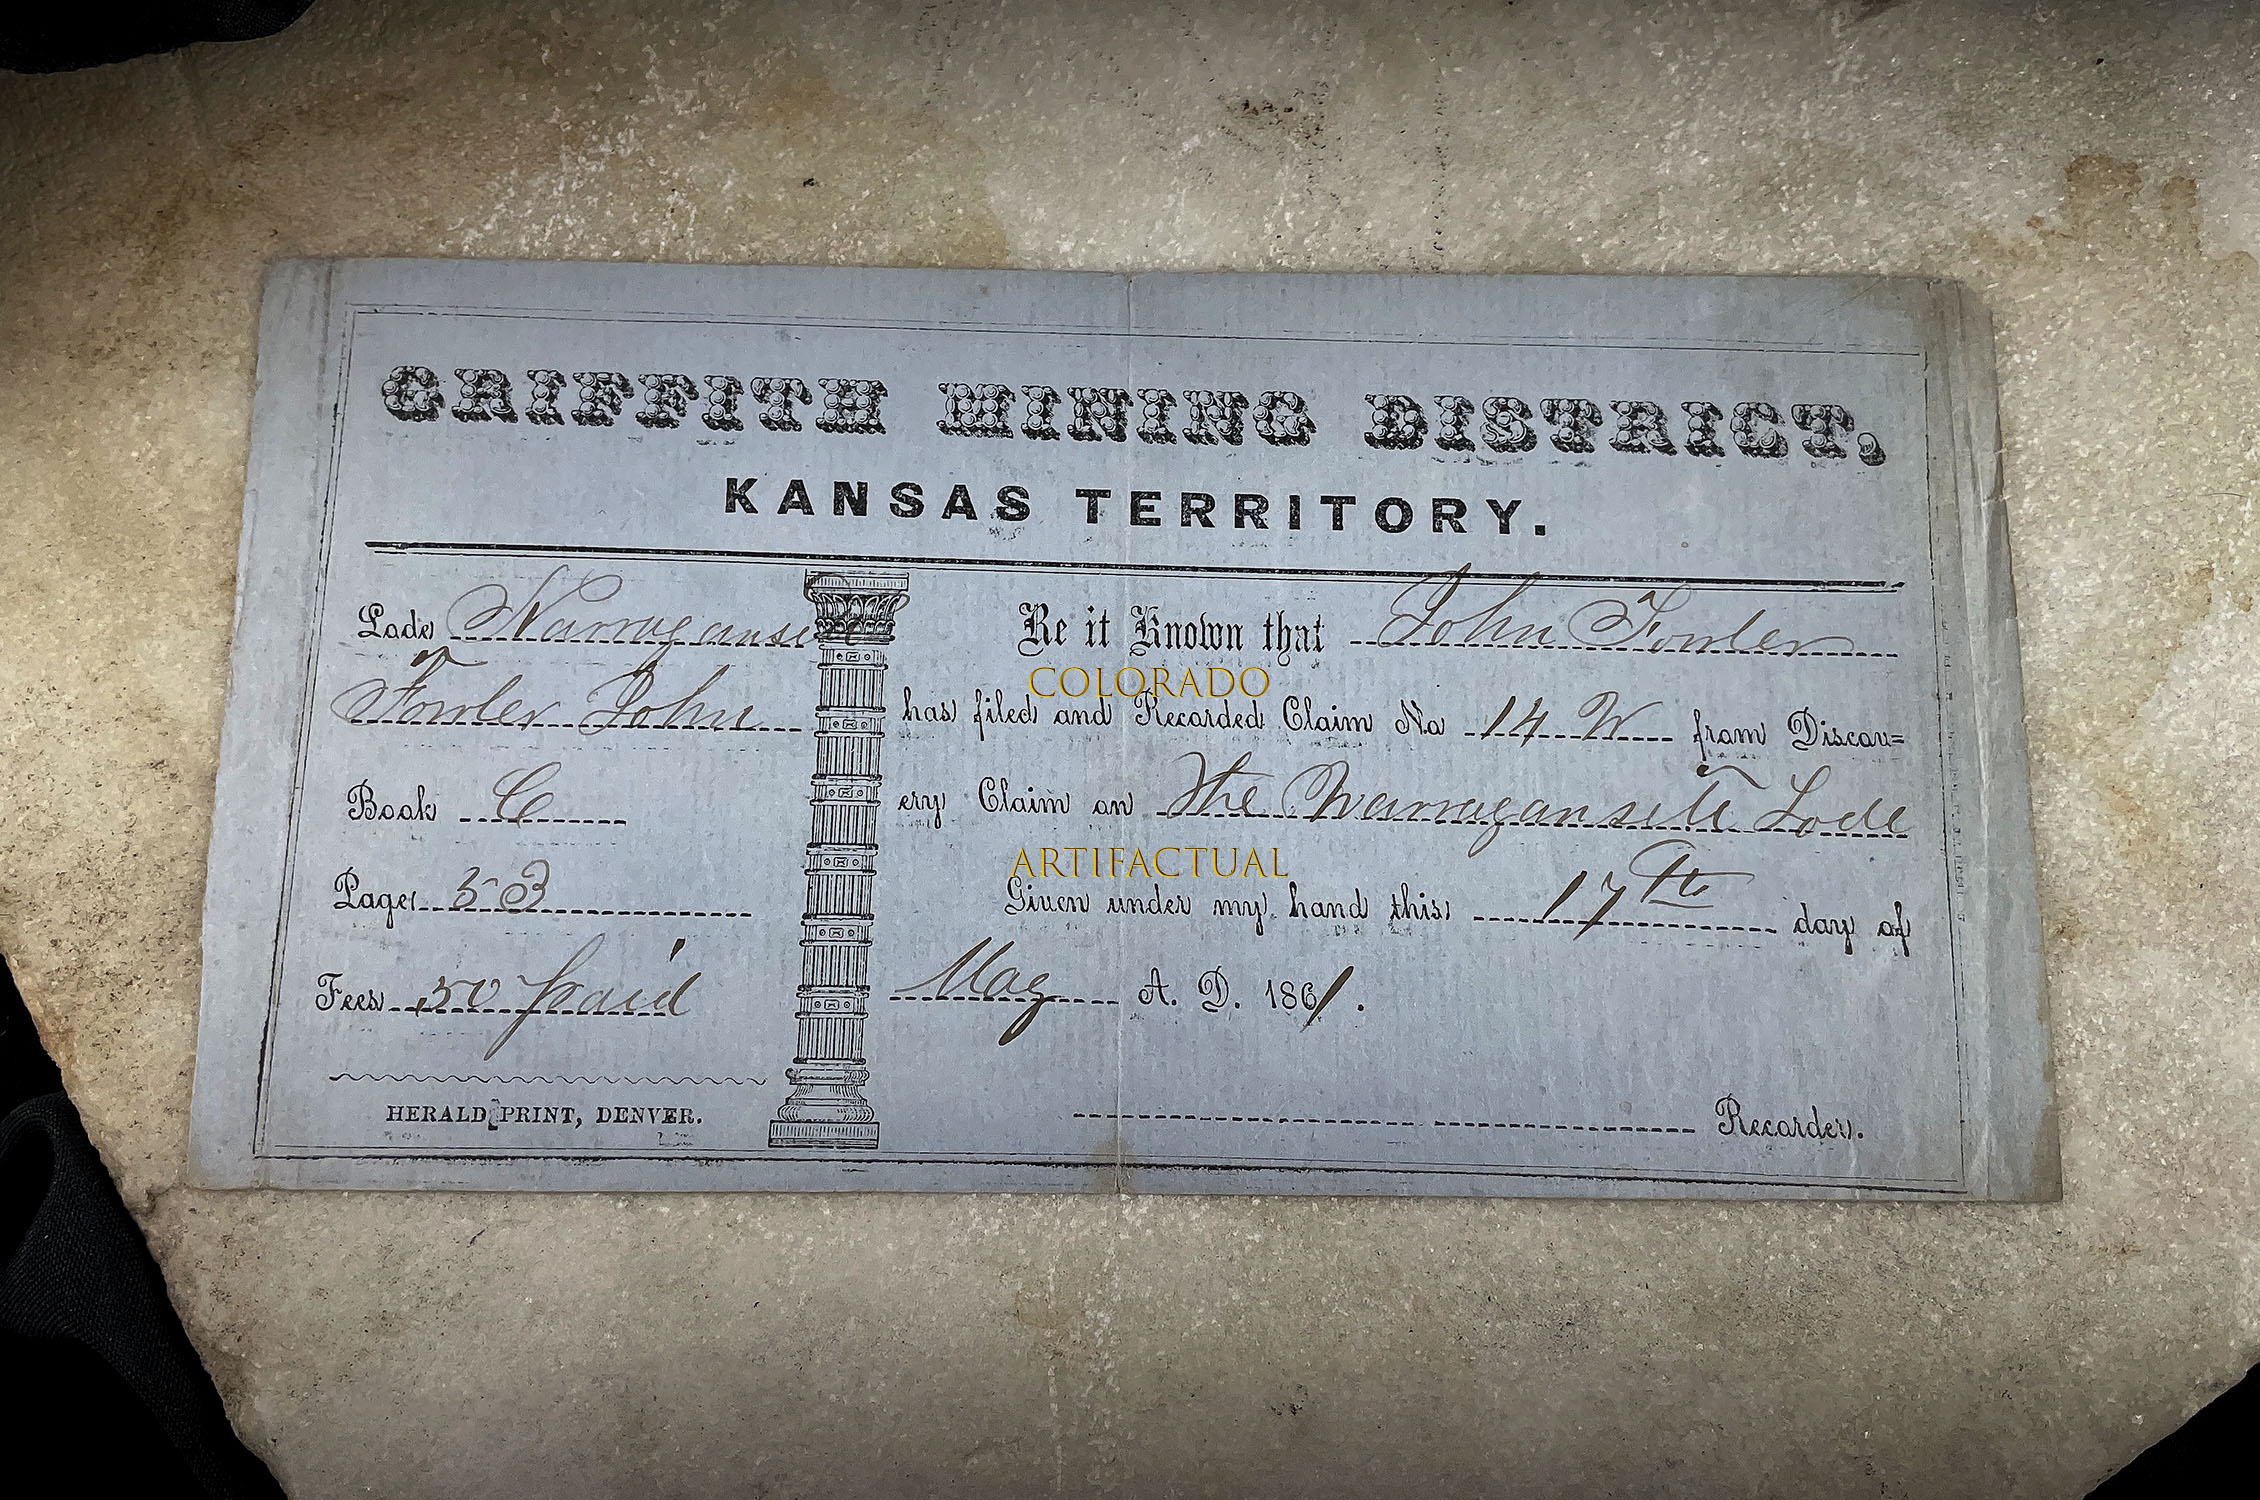 GRIFFITH MINING DISTRICT, KANSAS TERRITORY Mining Claim Certificate, 1861